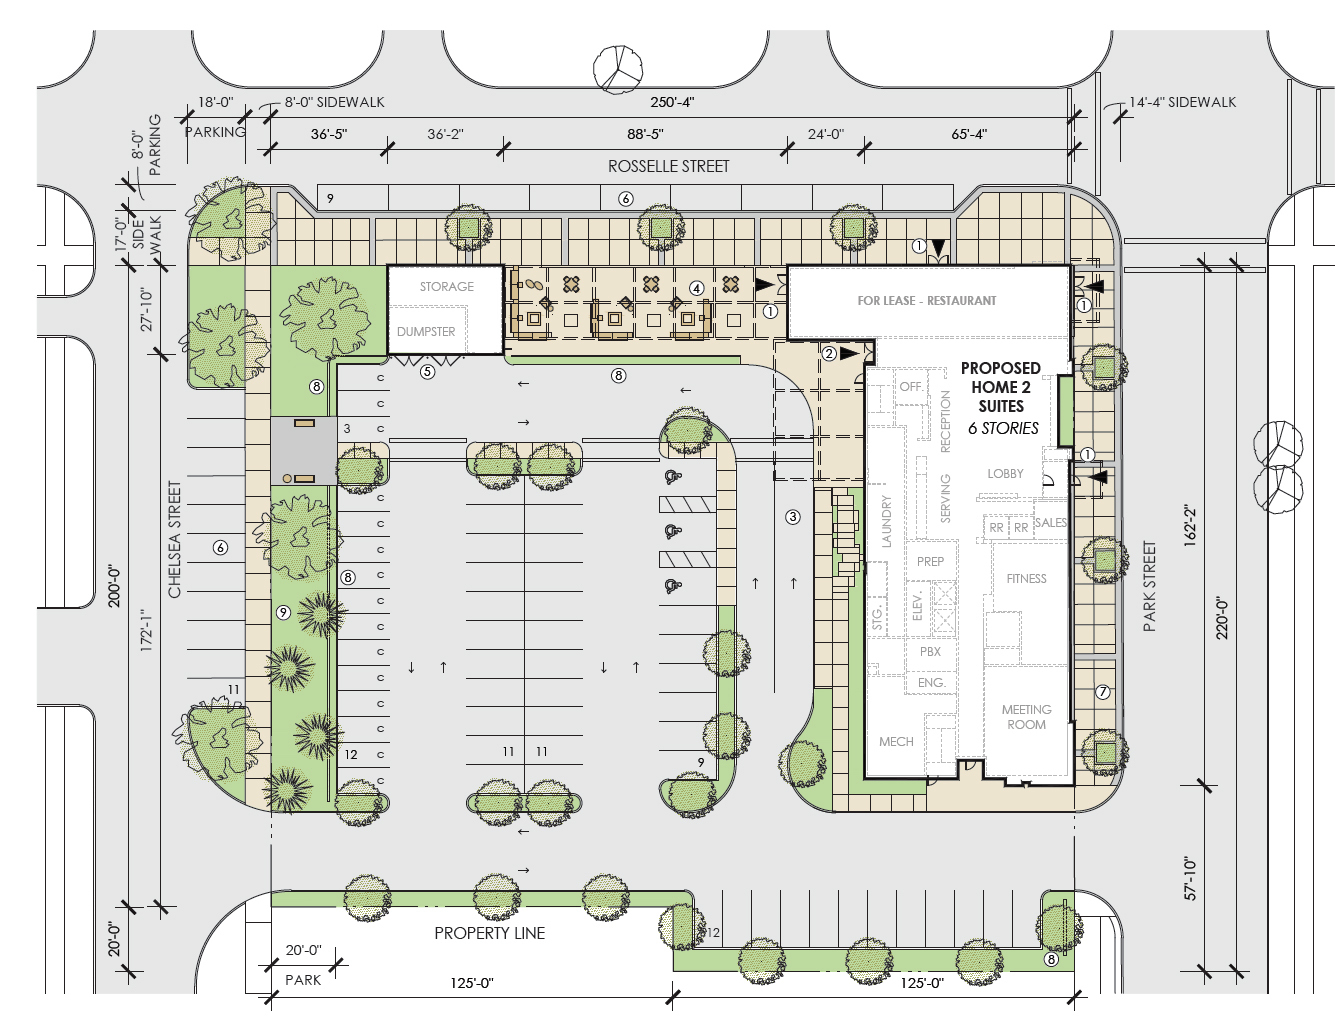 The site plan for the 100-room, almost 62,500-square-foot hotel.